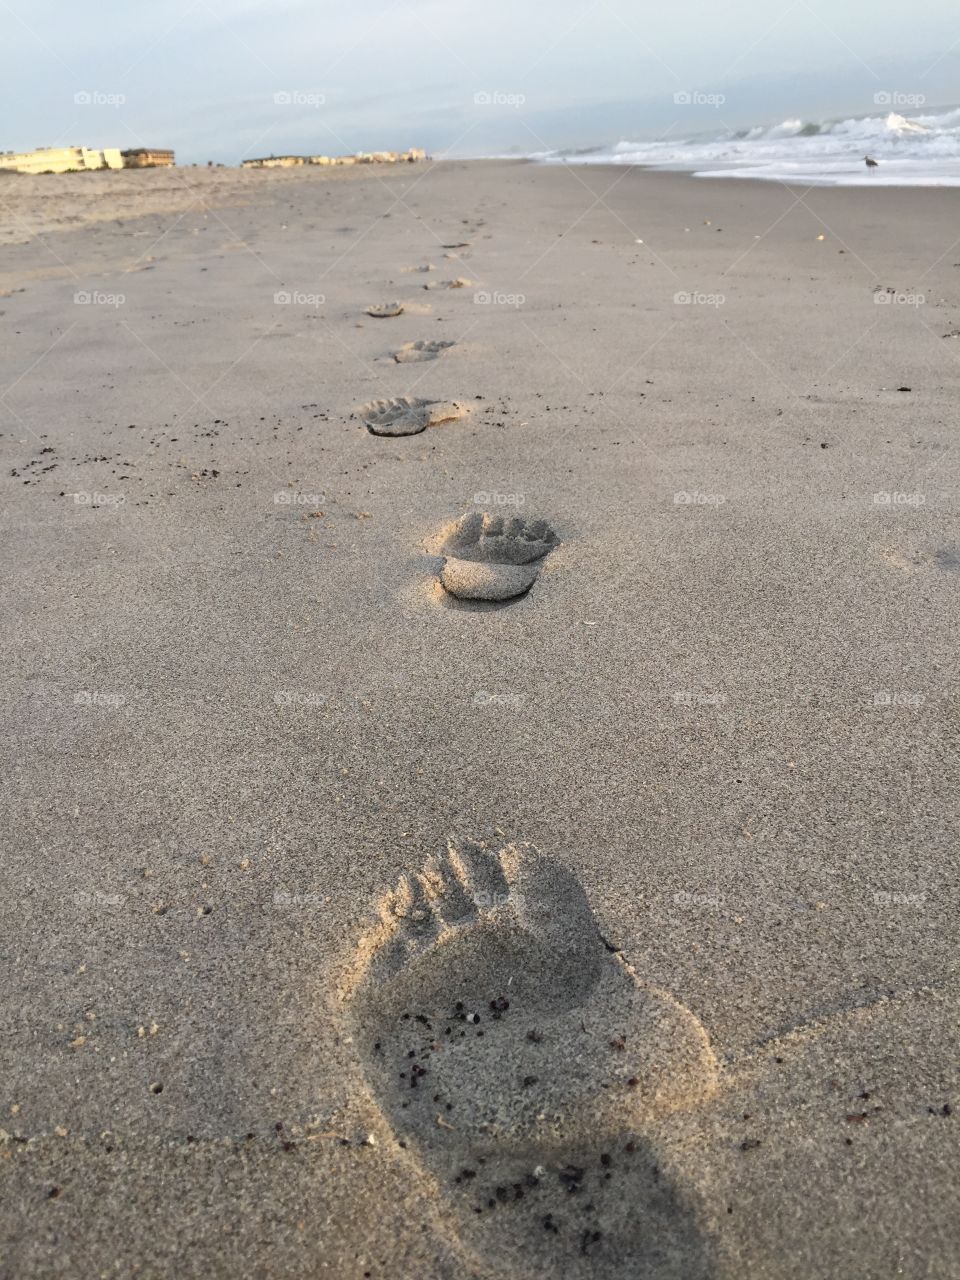 Early morning steps are on the beach